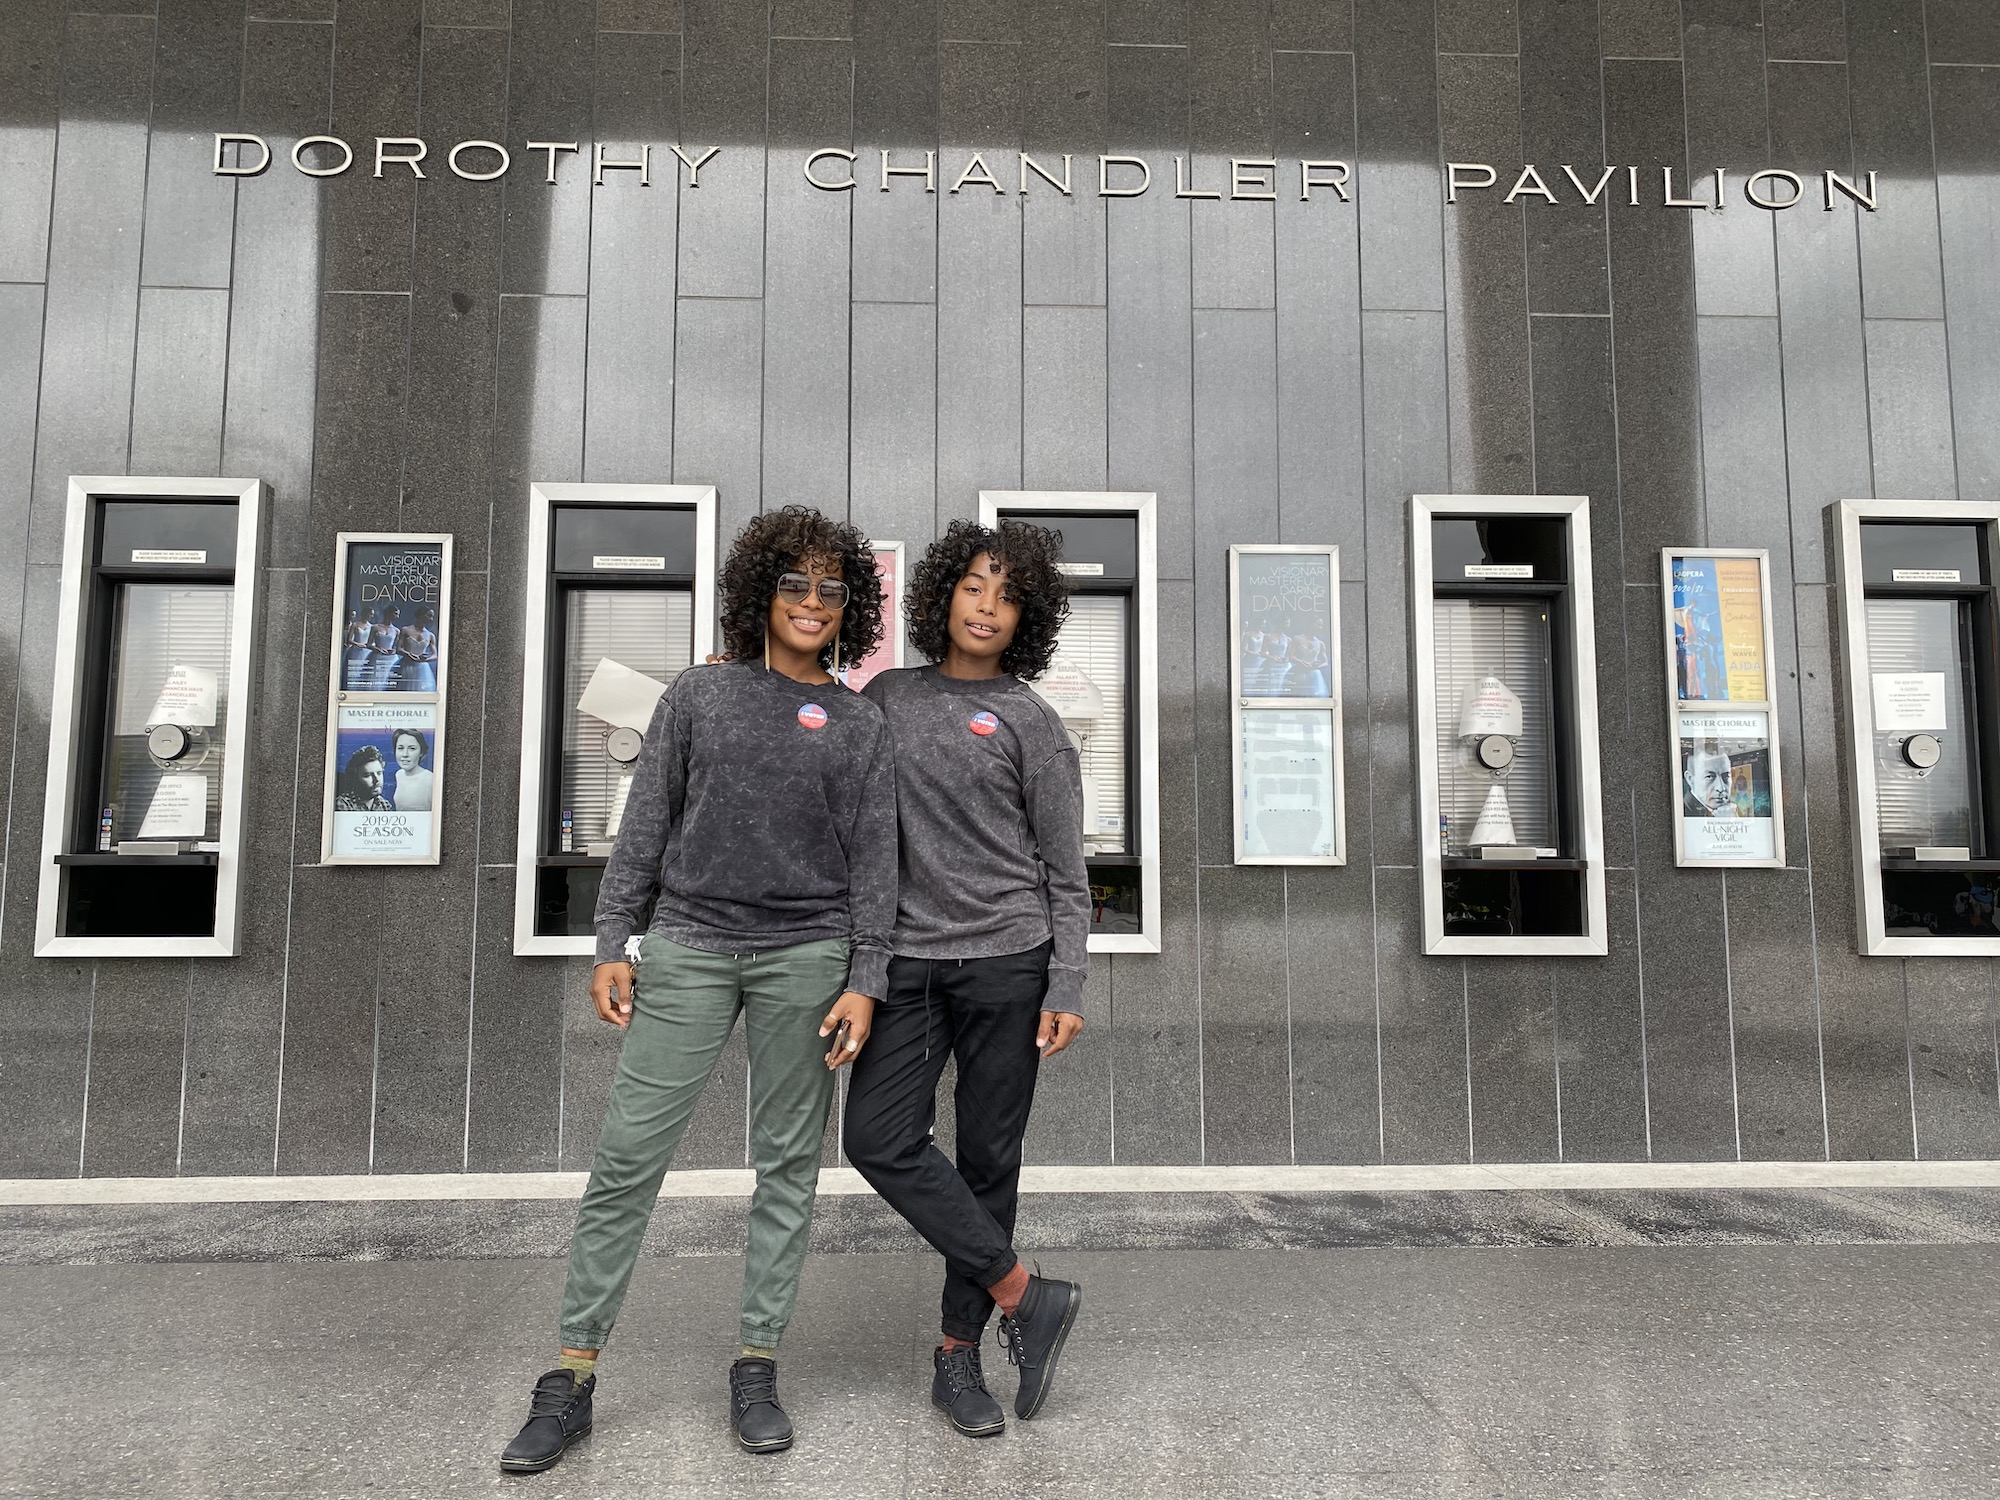 Twins Rachel and Gabrielle Newman in front of the Dorothy Chandler Pavilion